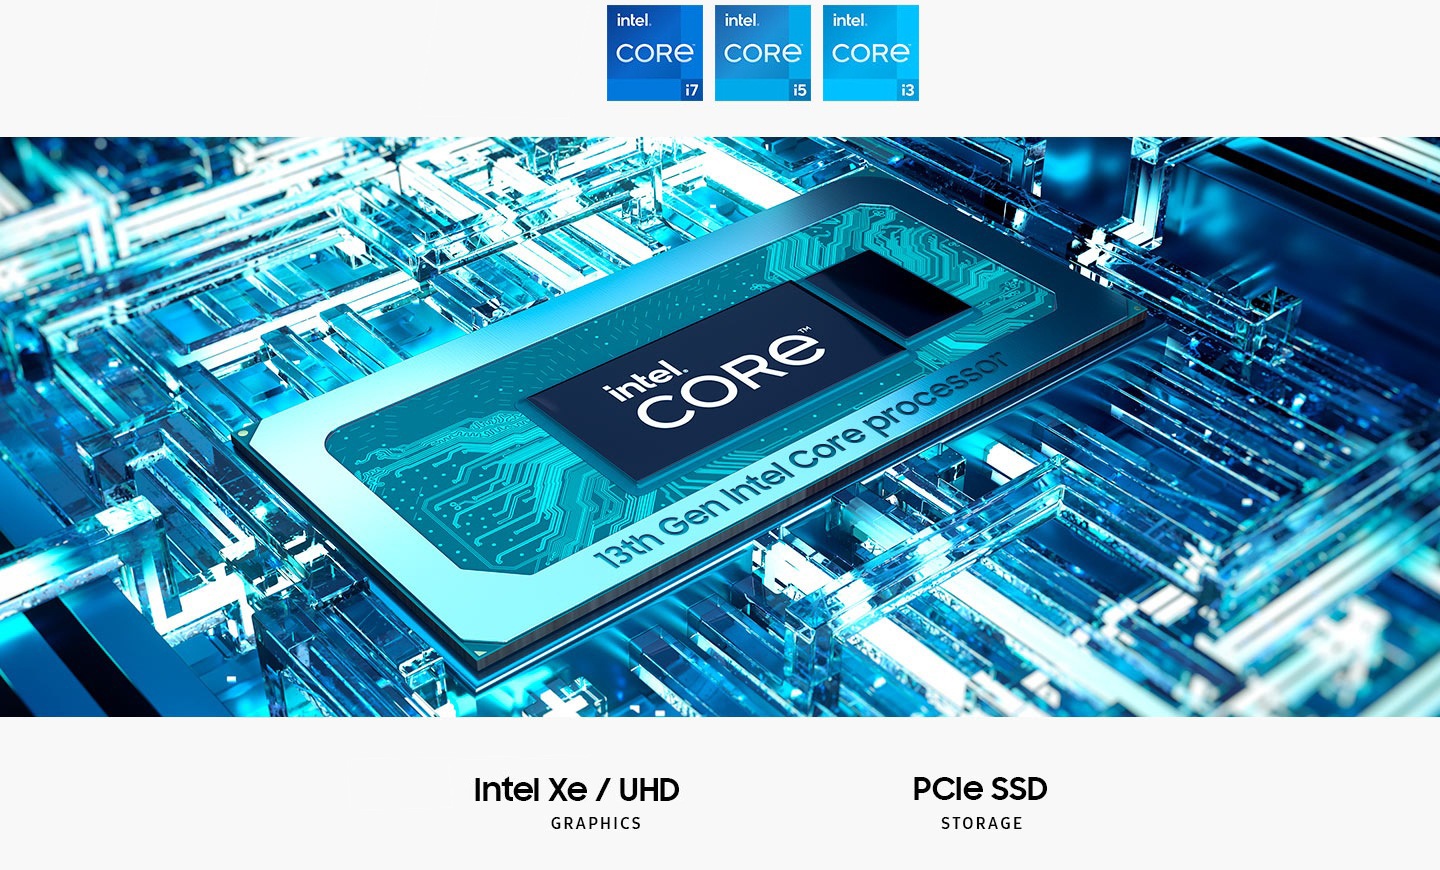 13th Gen Intel® Core™ processor is on the mainboard with the text intel® Core™ in the middle. Intel Xe / UHD / Arc Graphics. PCIe SSD Storage. Intel Core i7, intel Core i5, intel Core i3, intel Inside and intel ARC Graphics logos are shown.